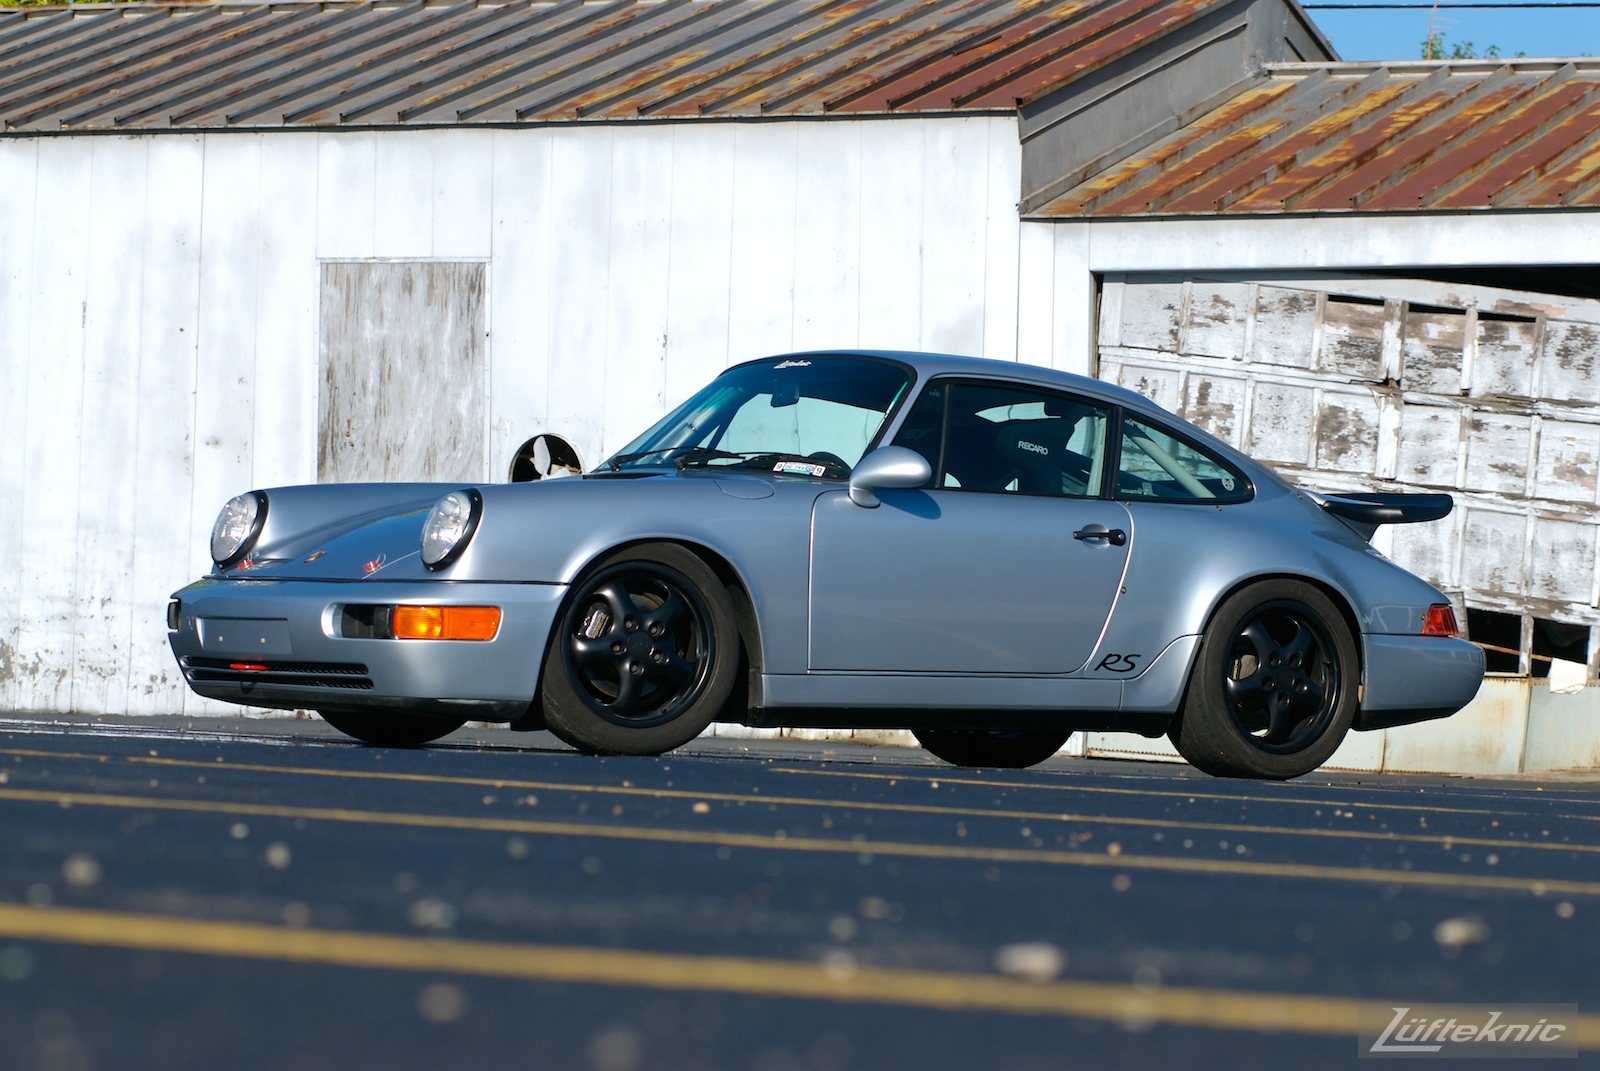 The 964 RS America shown from the front in a parking lot with a dilapidated garage in the background.